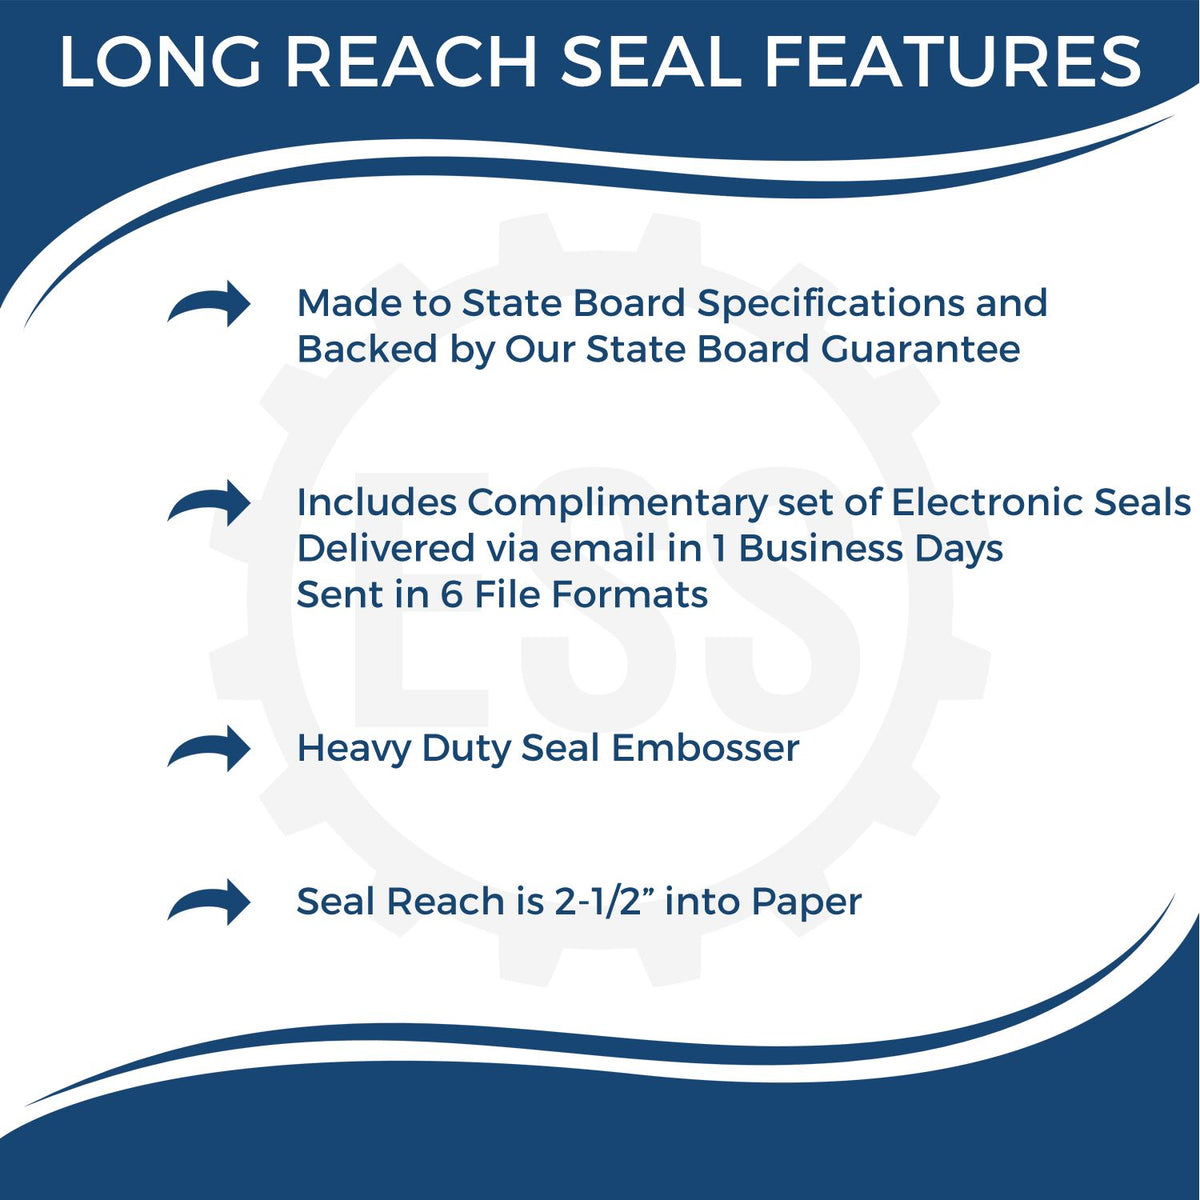 A picture of an infographic highlighting the selling points for the Long Reach Missouri PE Seal